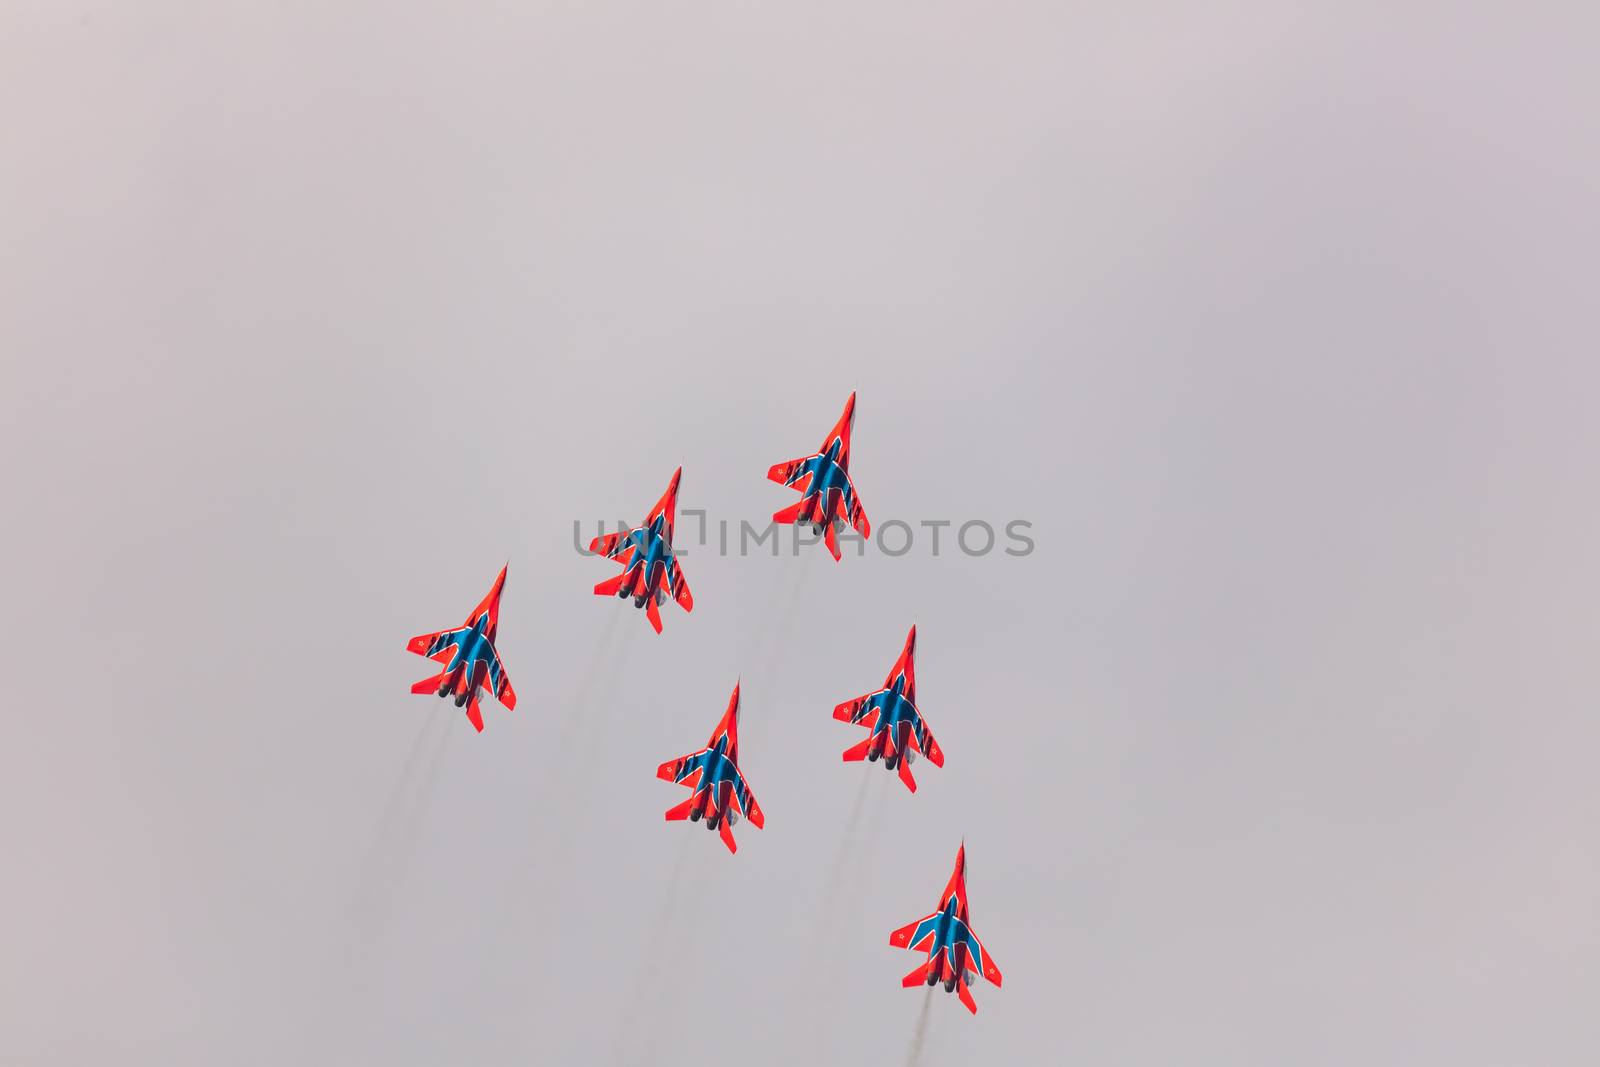 Barnaul, Russia - September 19, 2020: A low angle shot of Strizhi MiG-29 fighter jet squadron performing vertical ascending during an aeroshow. Blue cloudy sky as a background.